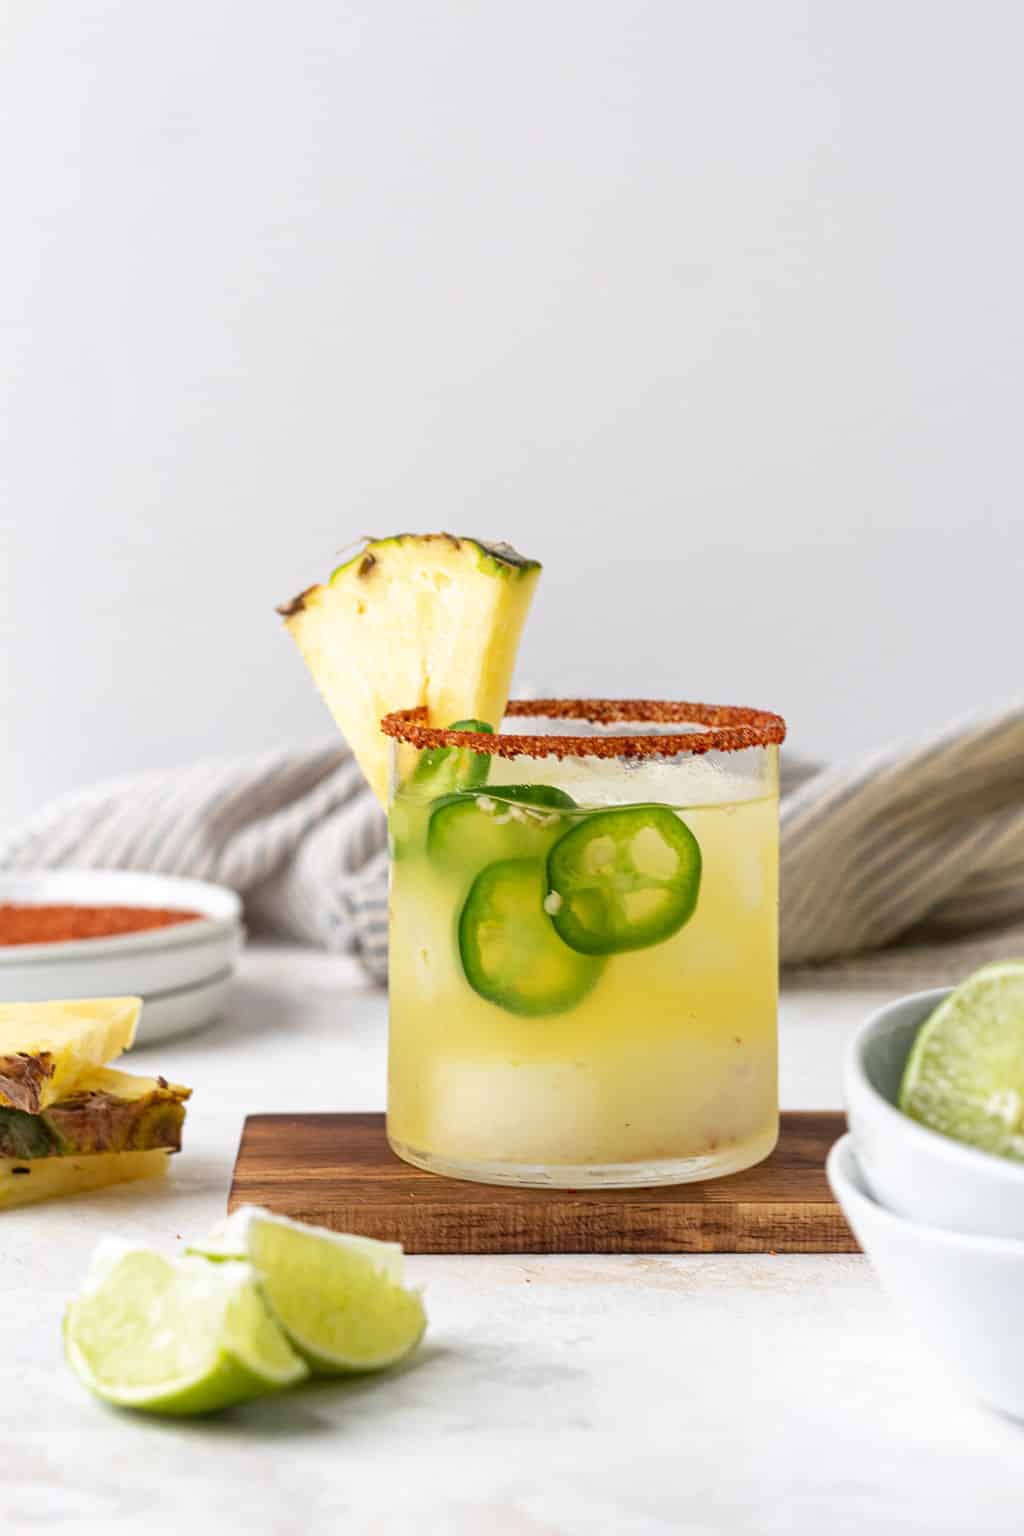 Spicy pineapple margarita with jalapeno slices and pineapple wedge.